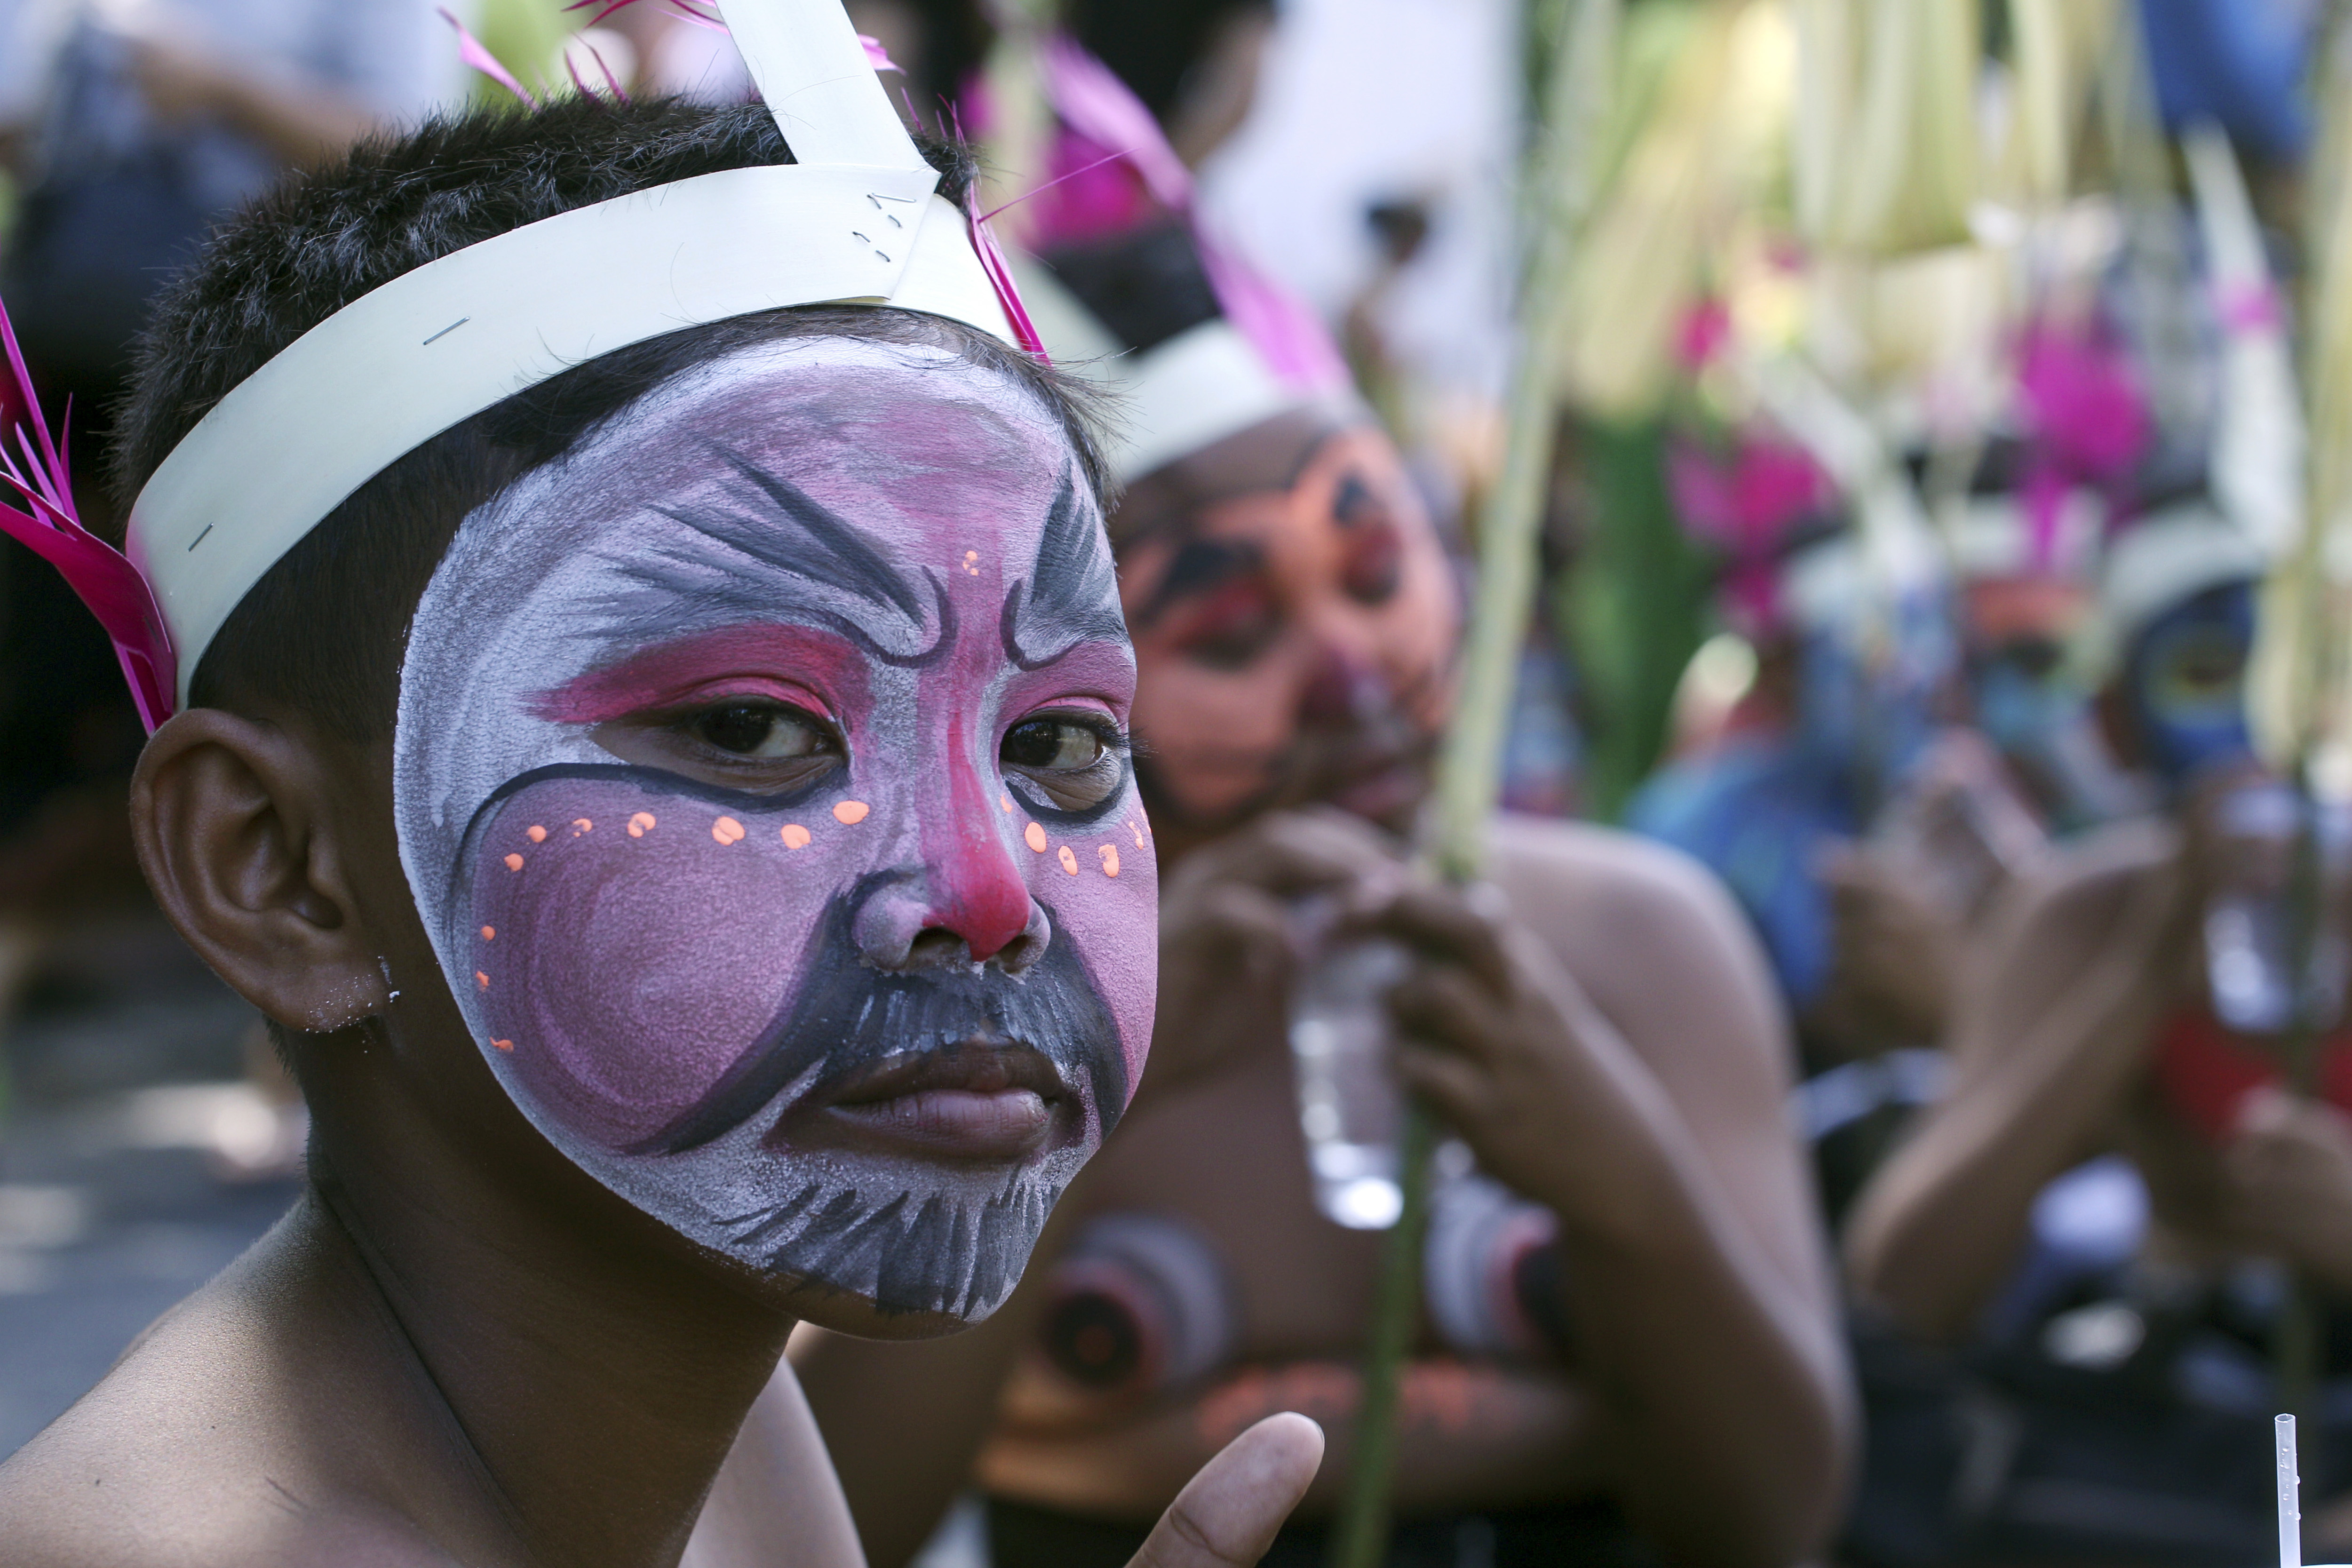 A boy with a panted face take part of the Bali Arts Festival parade in Bali, Indonesia, Saturday, June 10, 2017. A month-long annual festival started on Saturday. (AP Photo/Firdia Lisnawati)